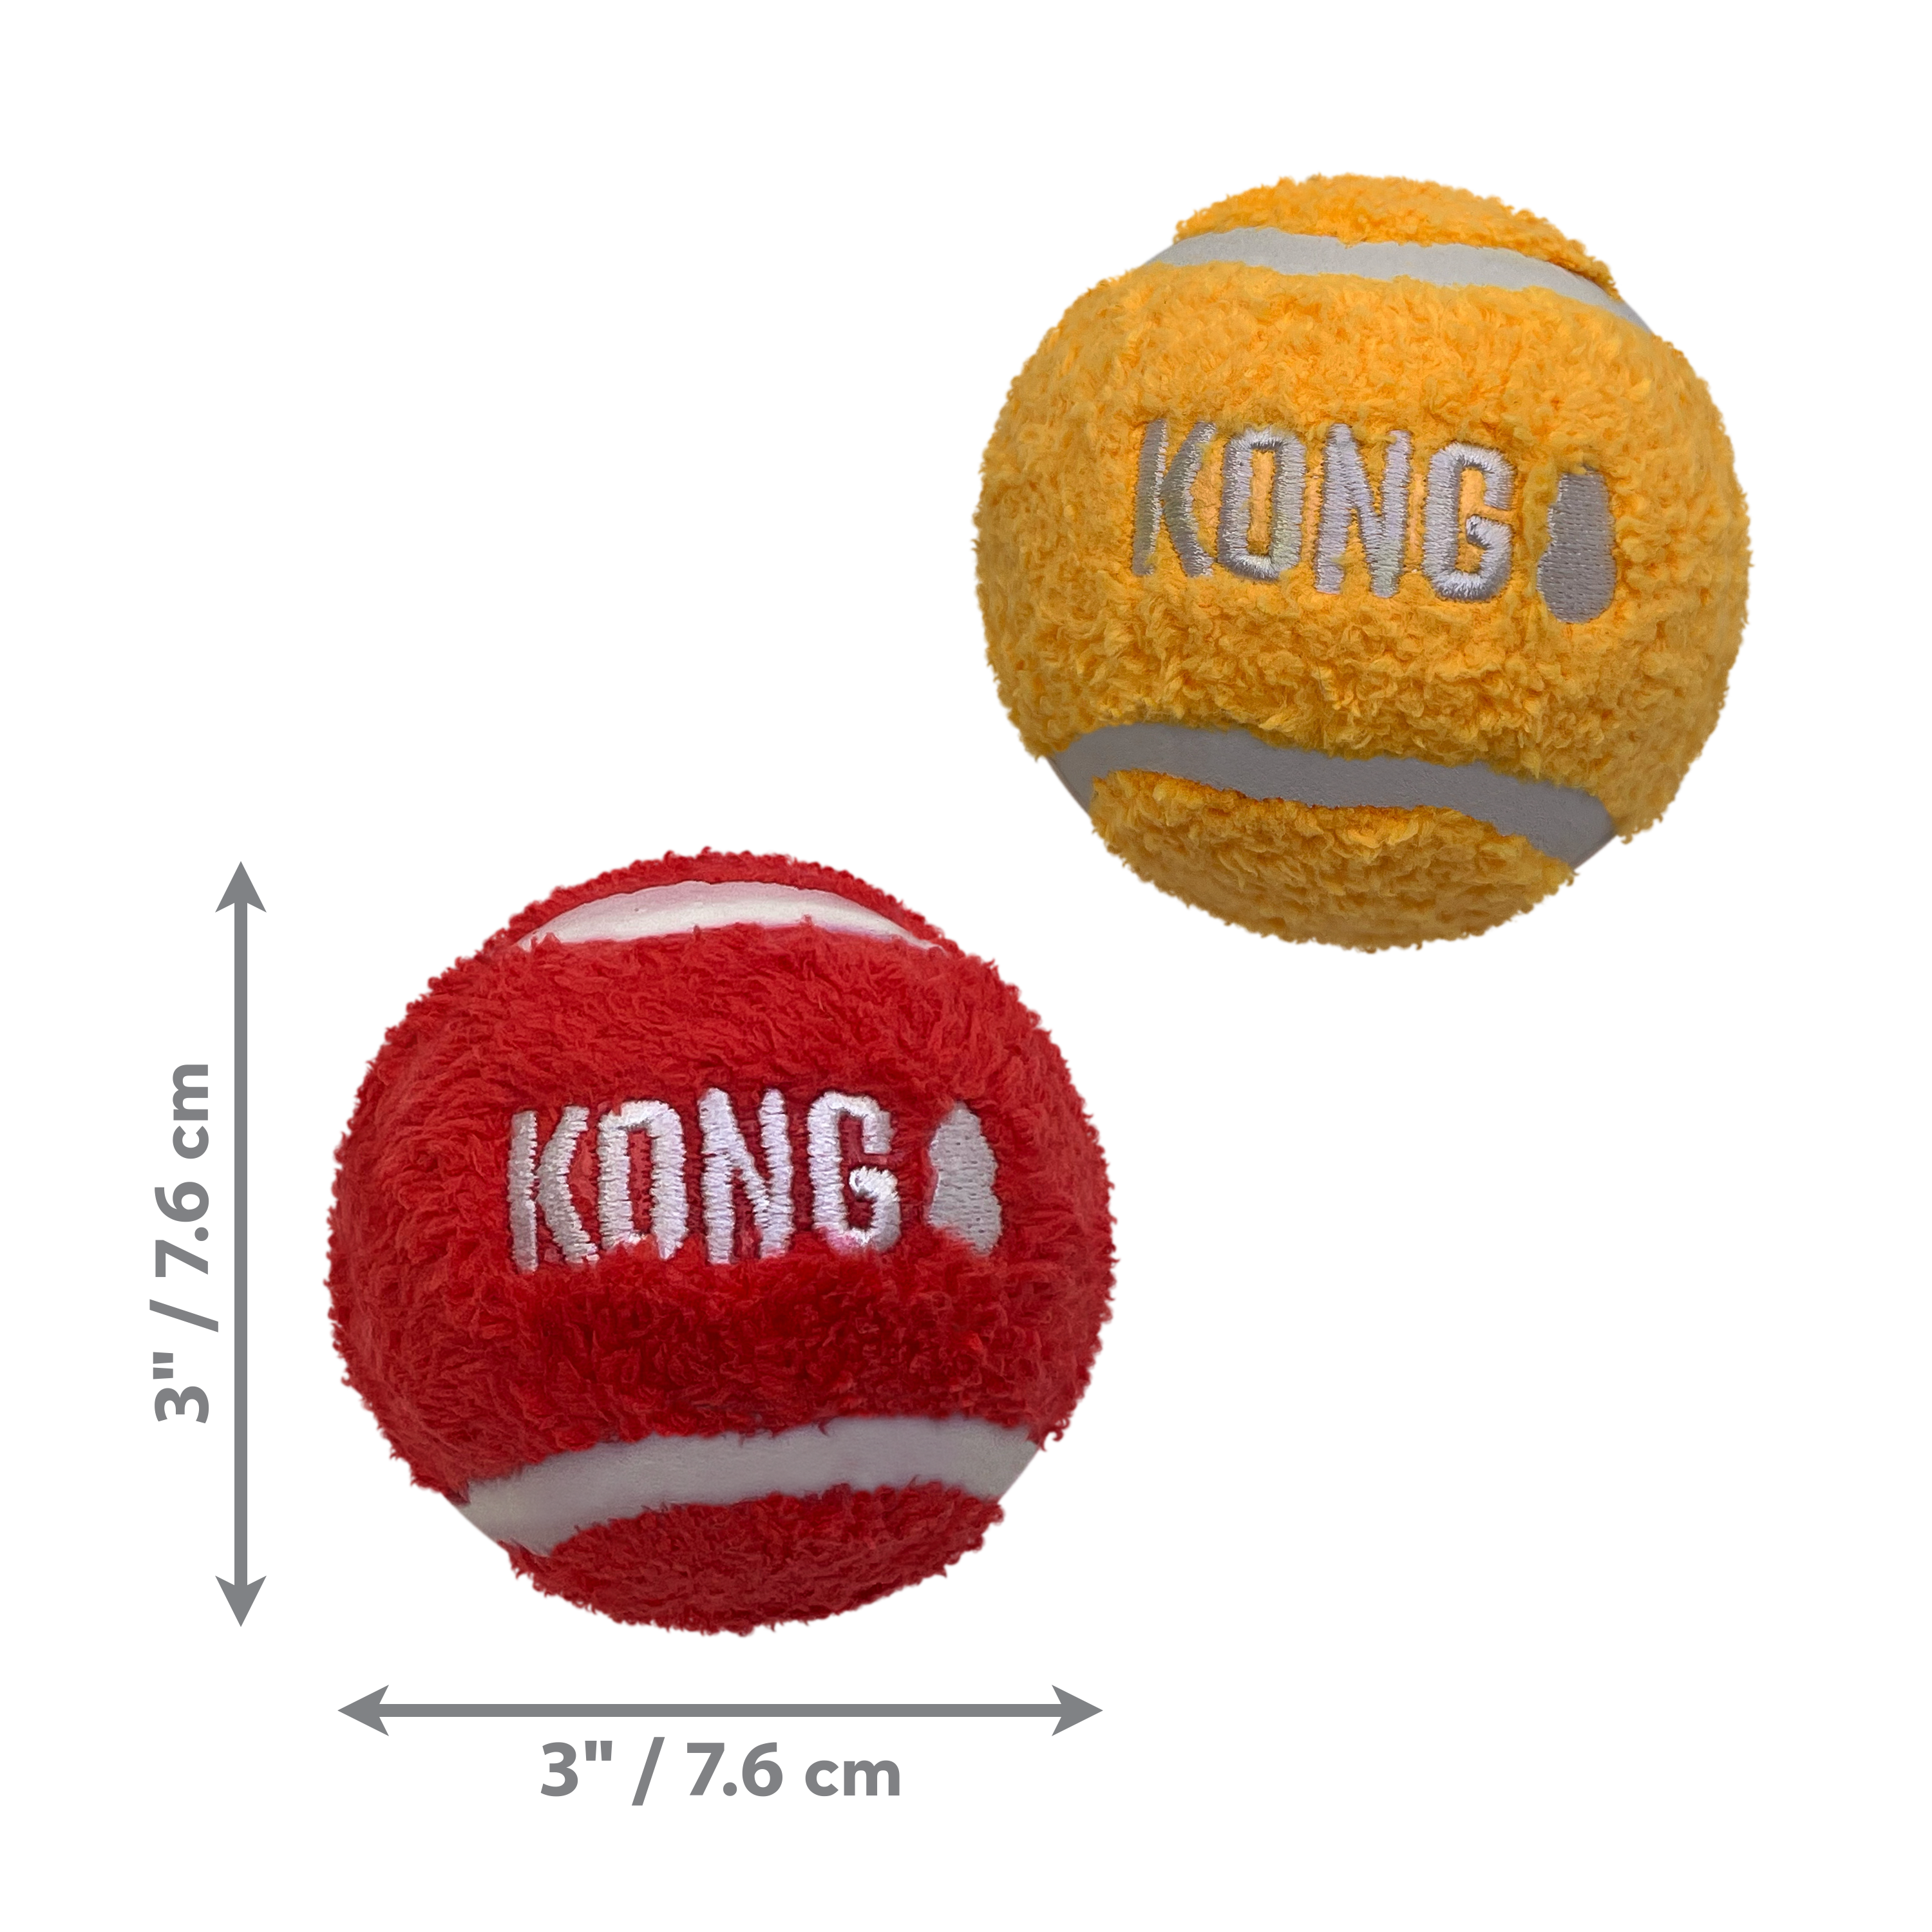 Sport Softies Balls 2-pk Assorted dimoffpack product image